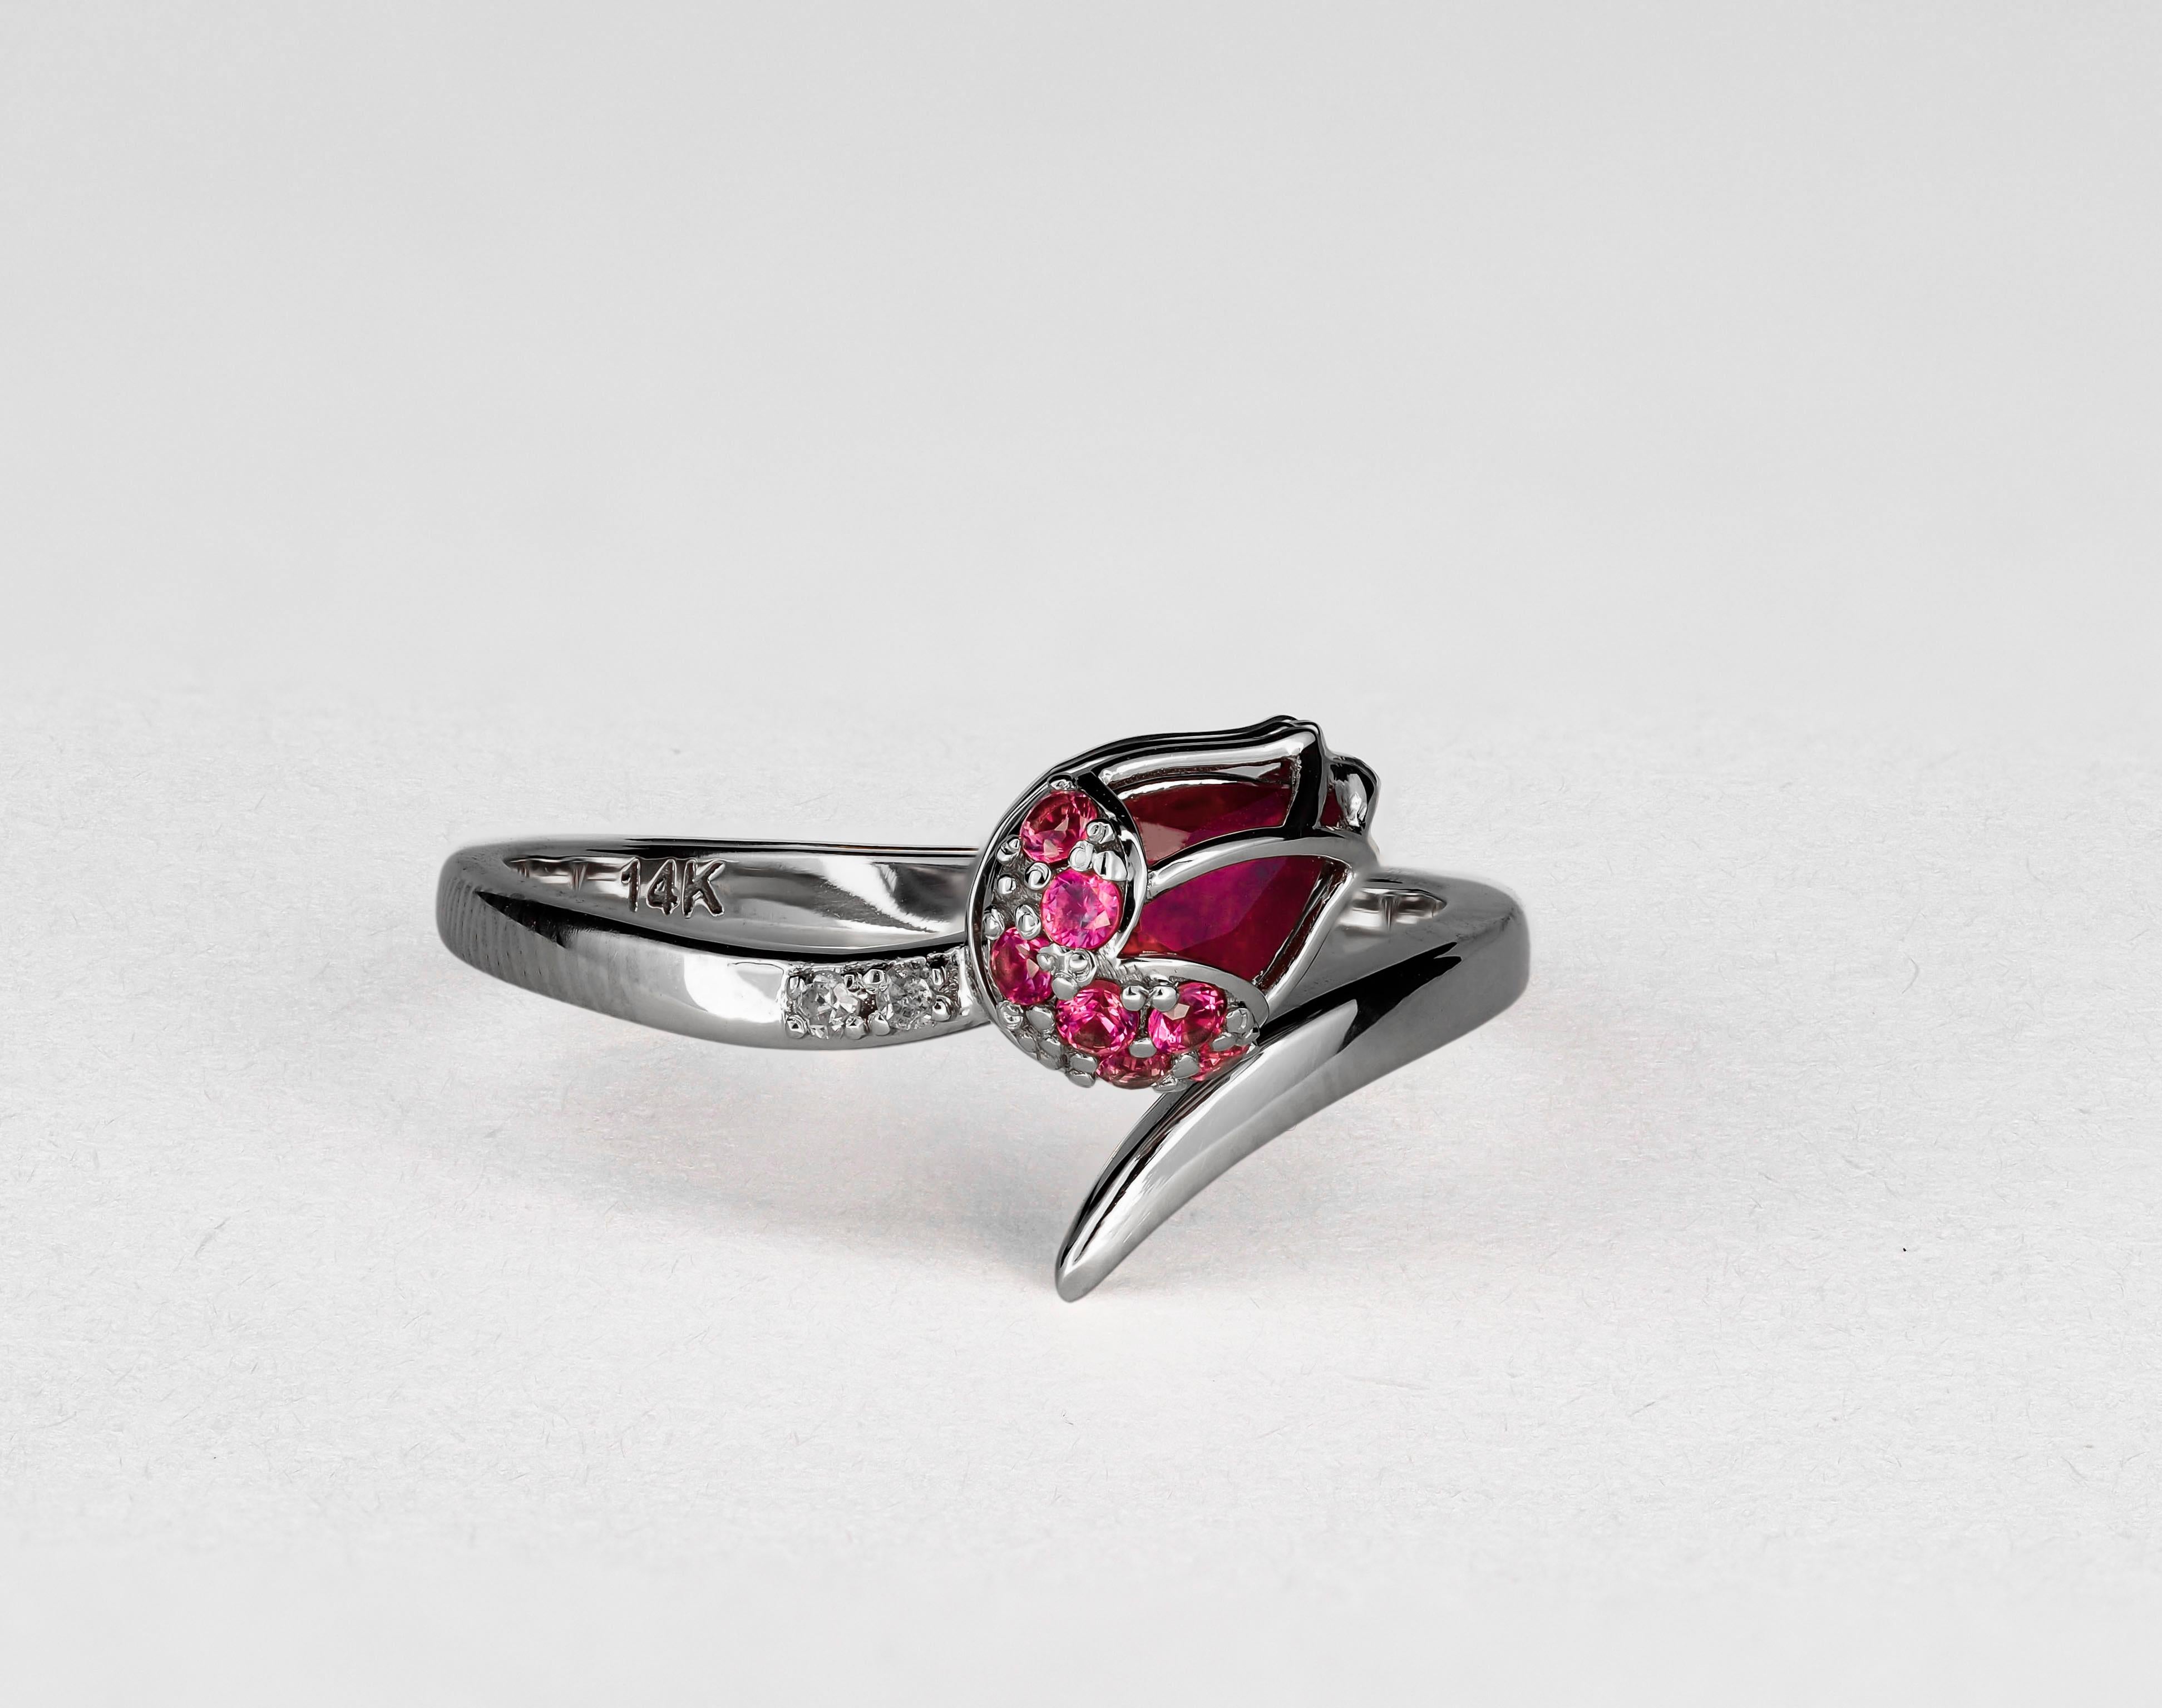 For Sale:  14 karat Gold Ring with Ruby. Gold tulip ring. July birthstone ruby ring 3